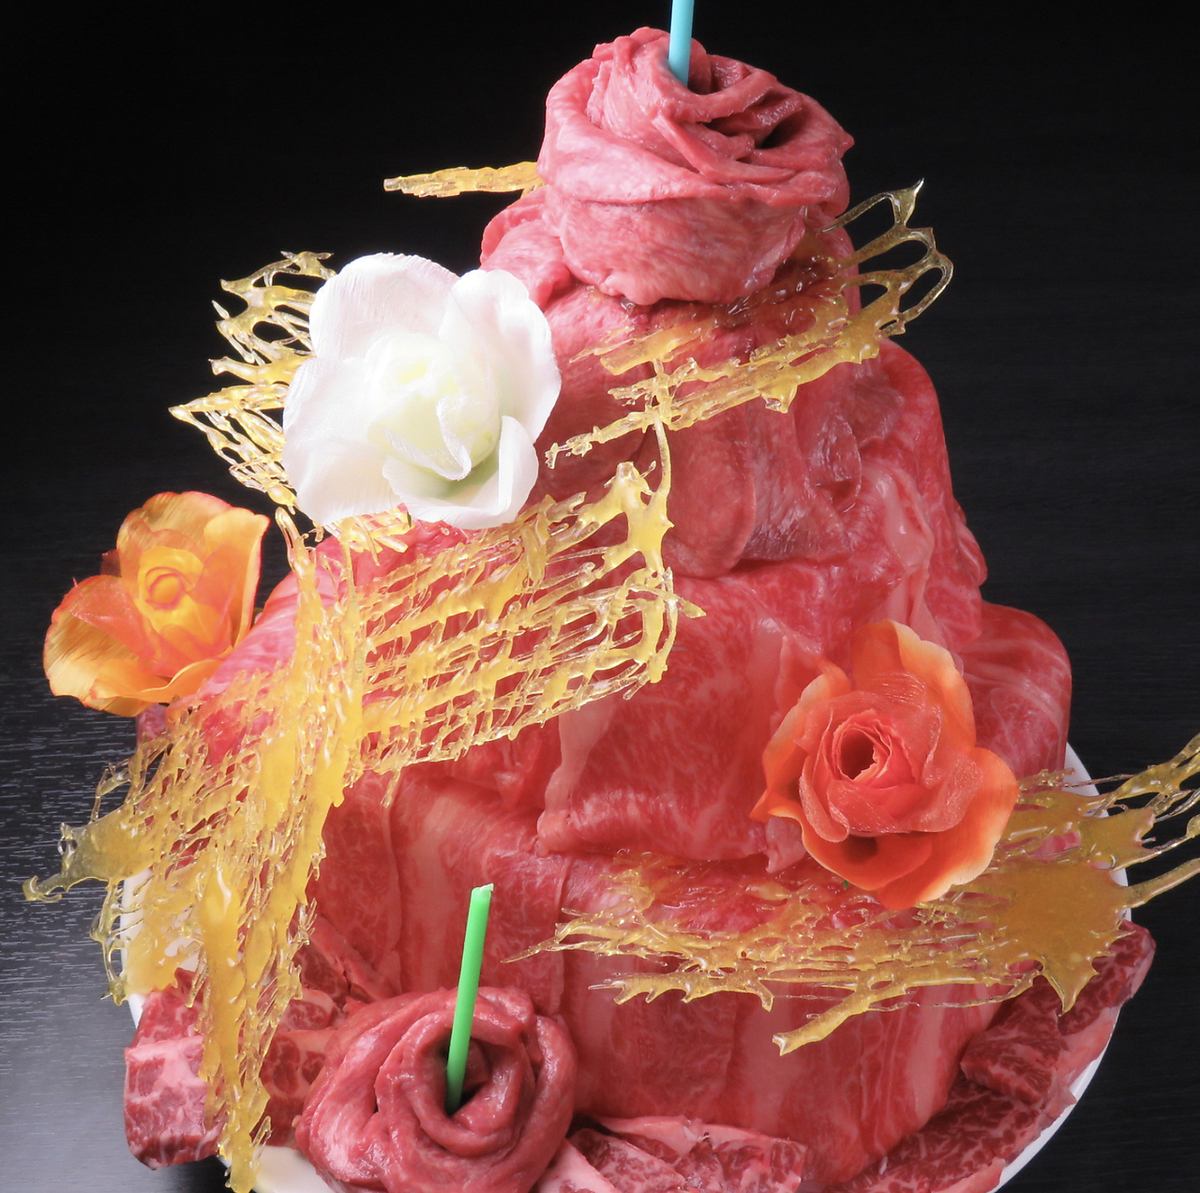 Dawn! and a powerful meat cake! Please for anniversary or birthday ◎